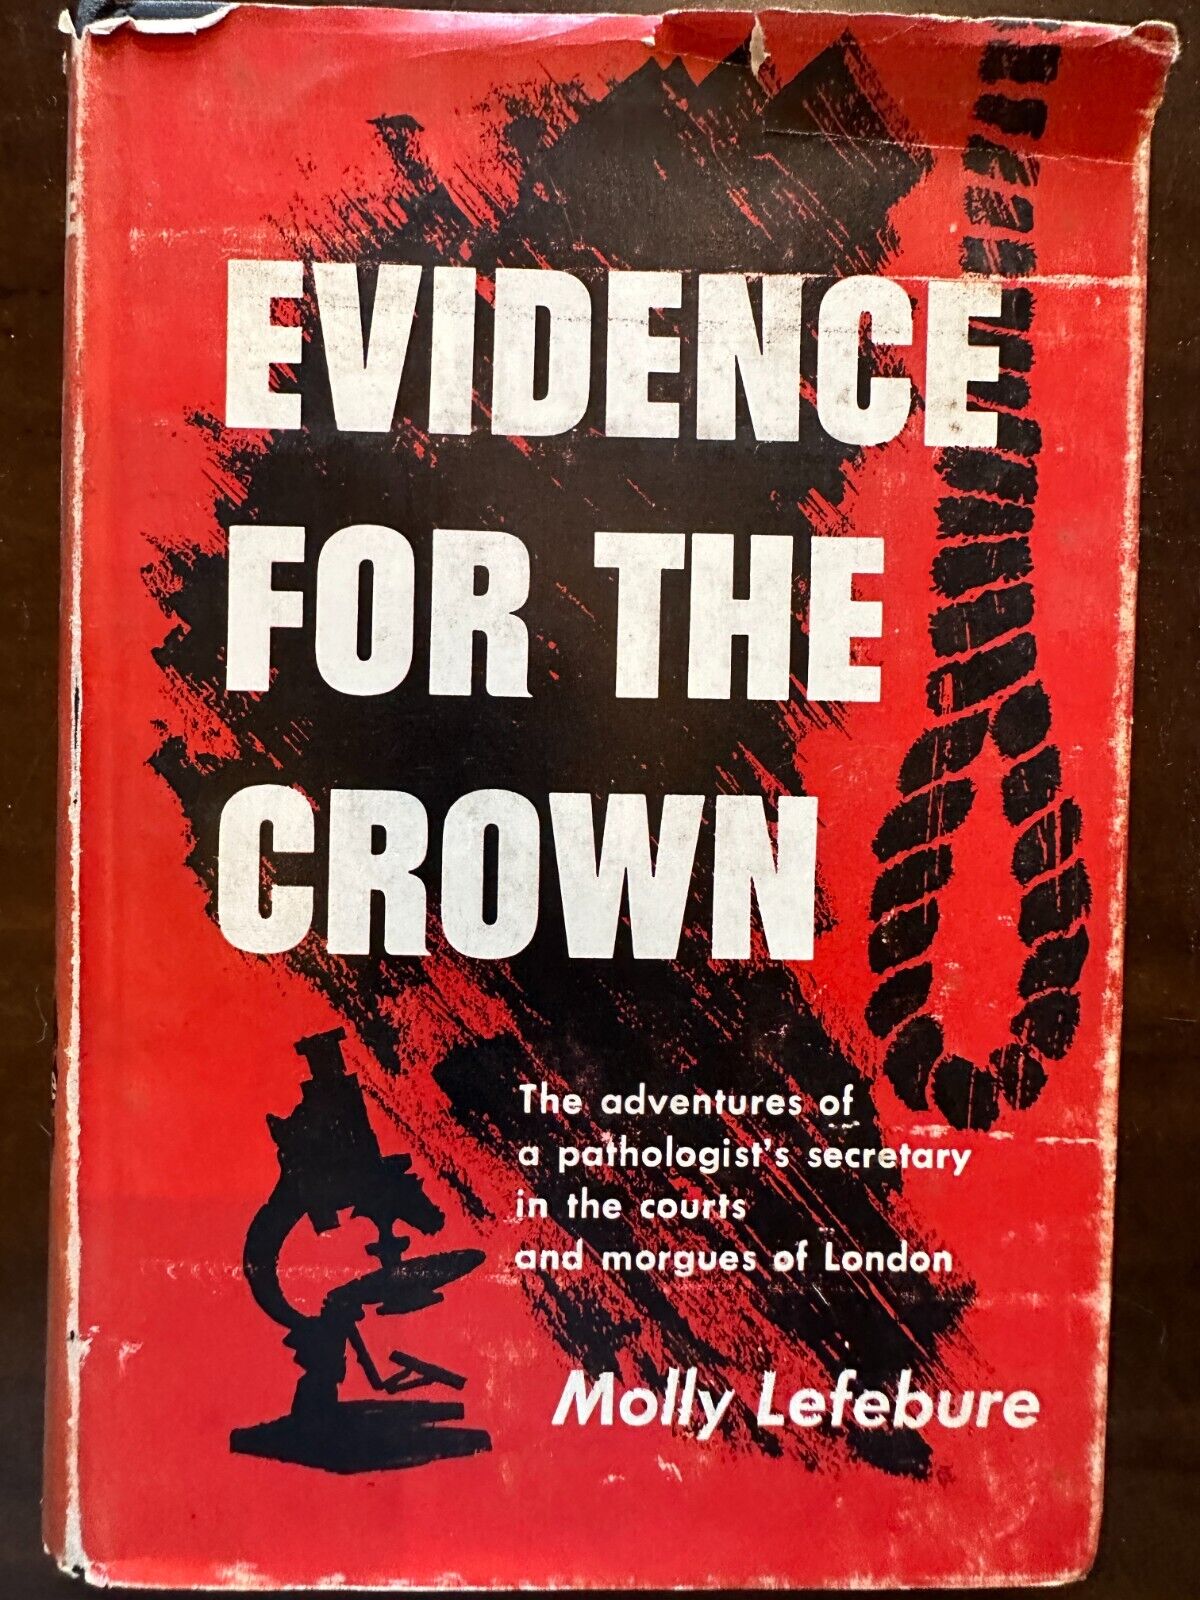 Evidence For The Crown by Molly Lefebure 1950 RARE